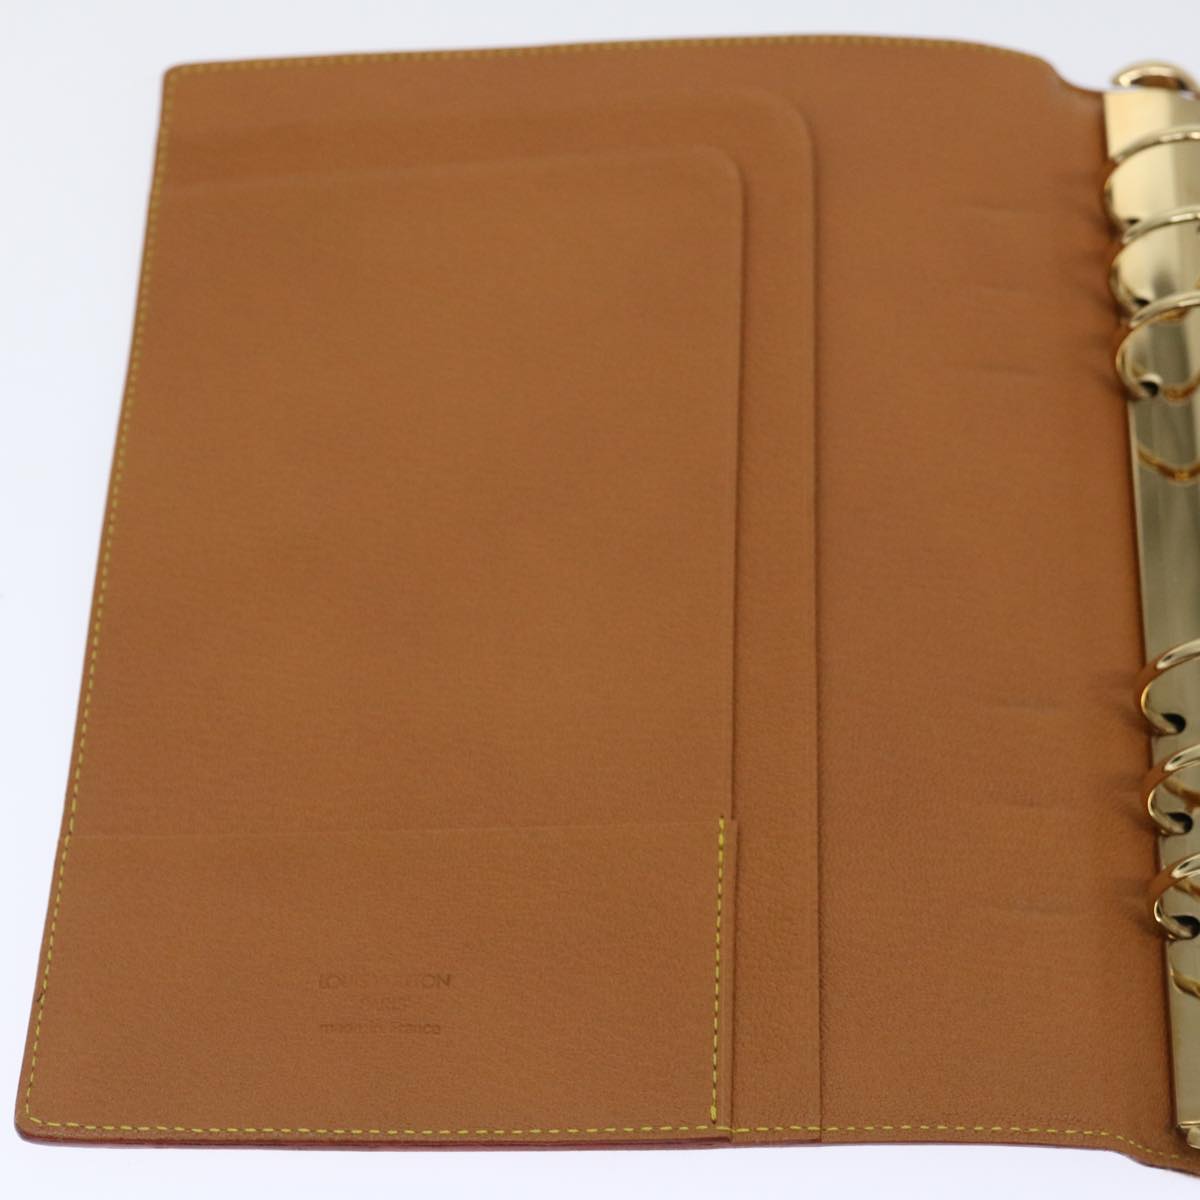 LOUIS VUITTON Nomad Agenda GM Day Planner Cover Beige R20473 LV Auth 70700A